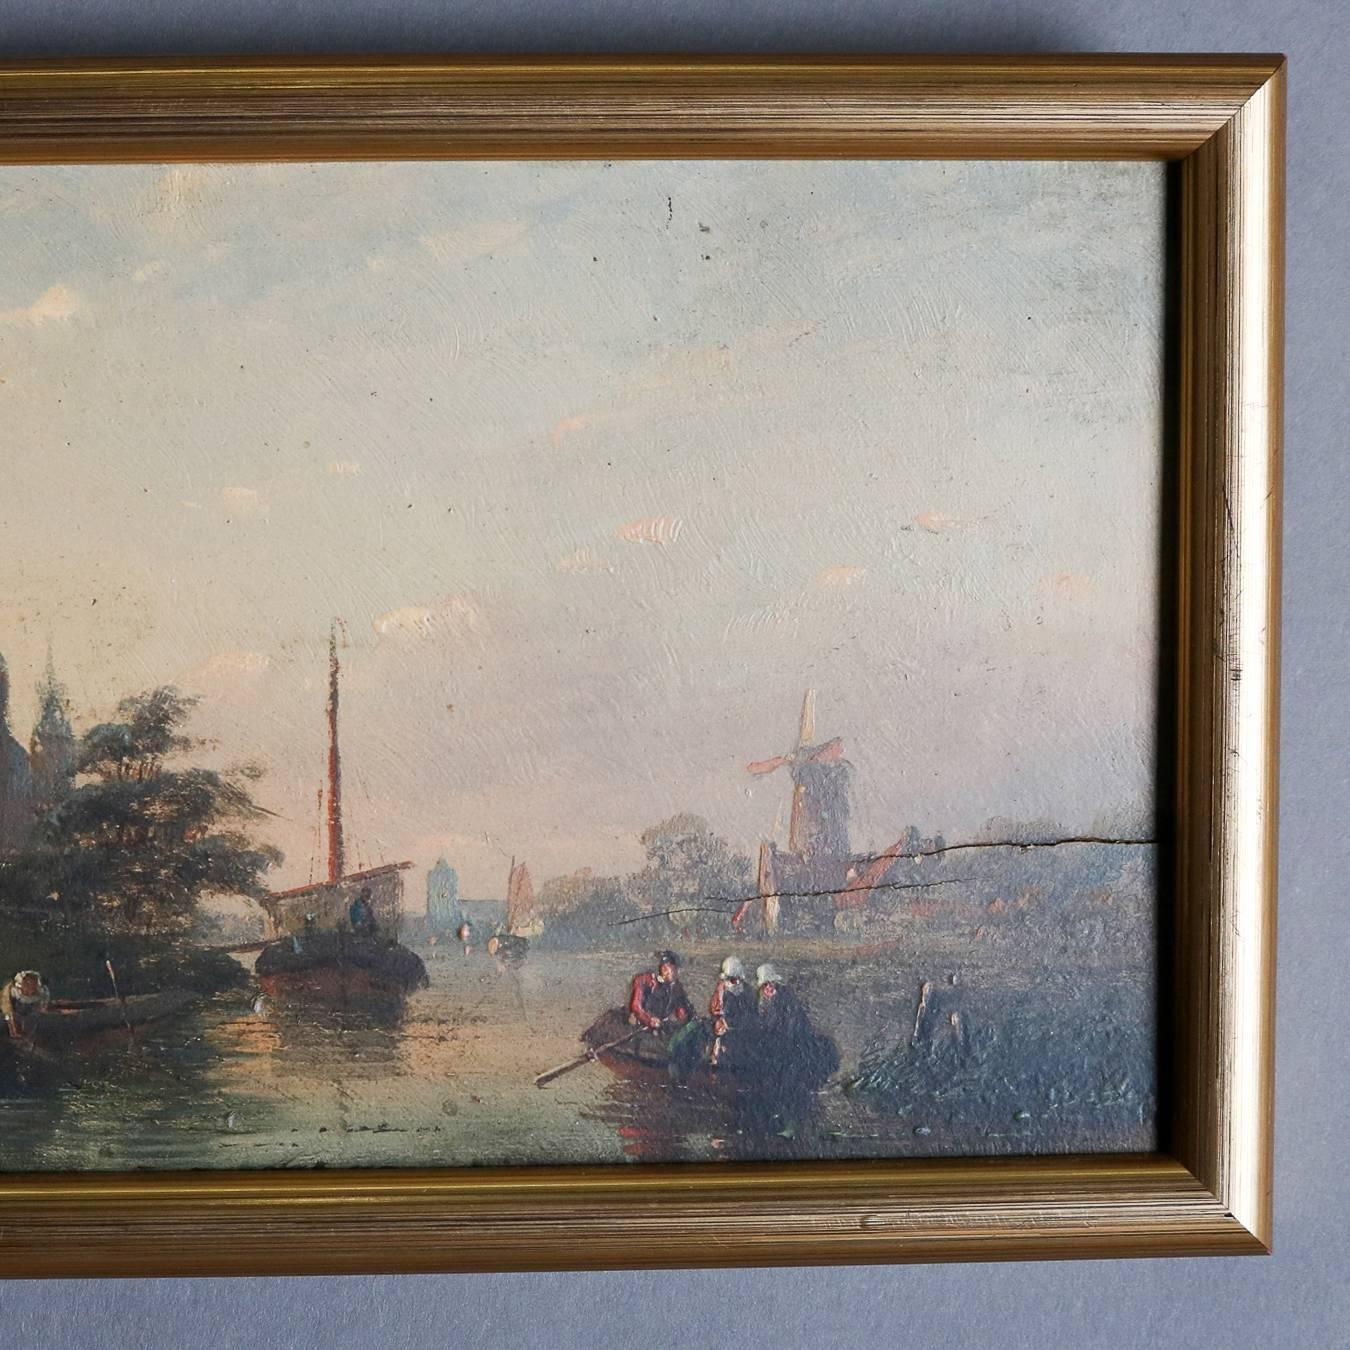 Antique miniature oil on board depicts Dutch harbor scene with sailing ships, recreational boaters and cityscape in the background, unsigned, 19th century

Measures - fr: 5" H x 8" W x .5" D, los: 4.25" H x 7.25" W.